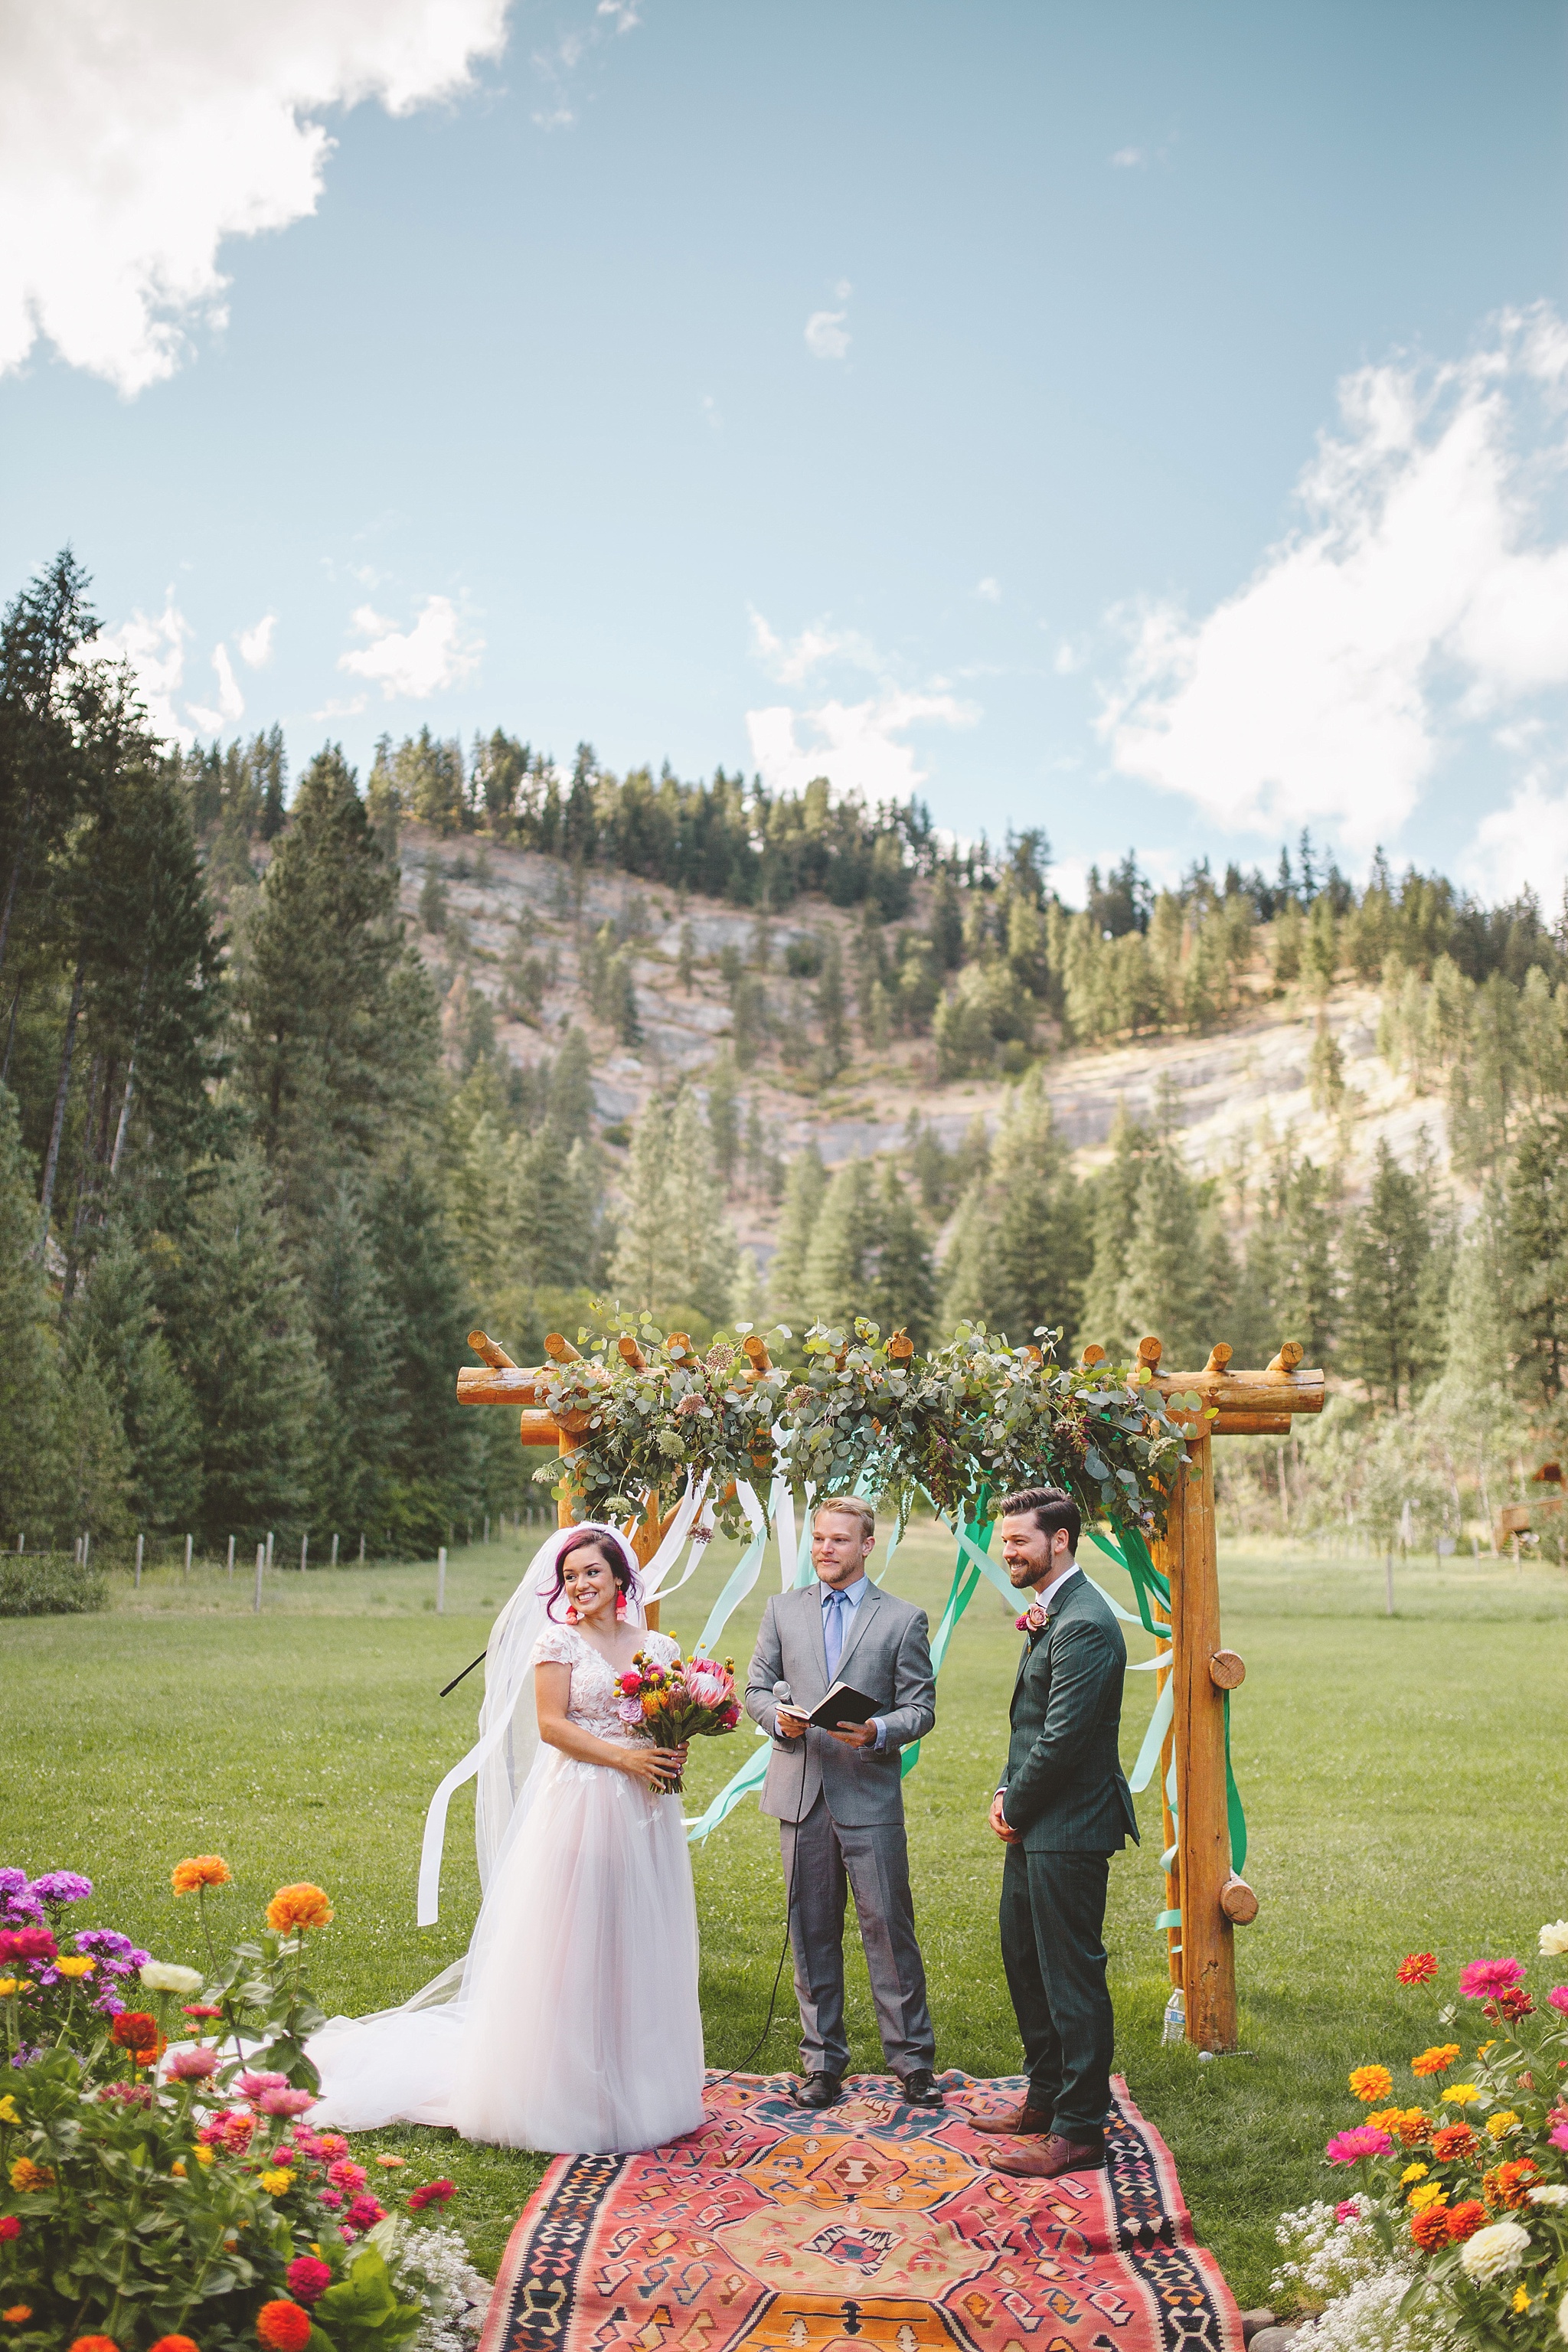 outdoor ceremony in the woods of washington